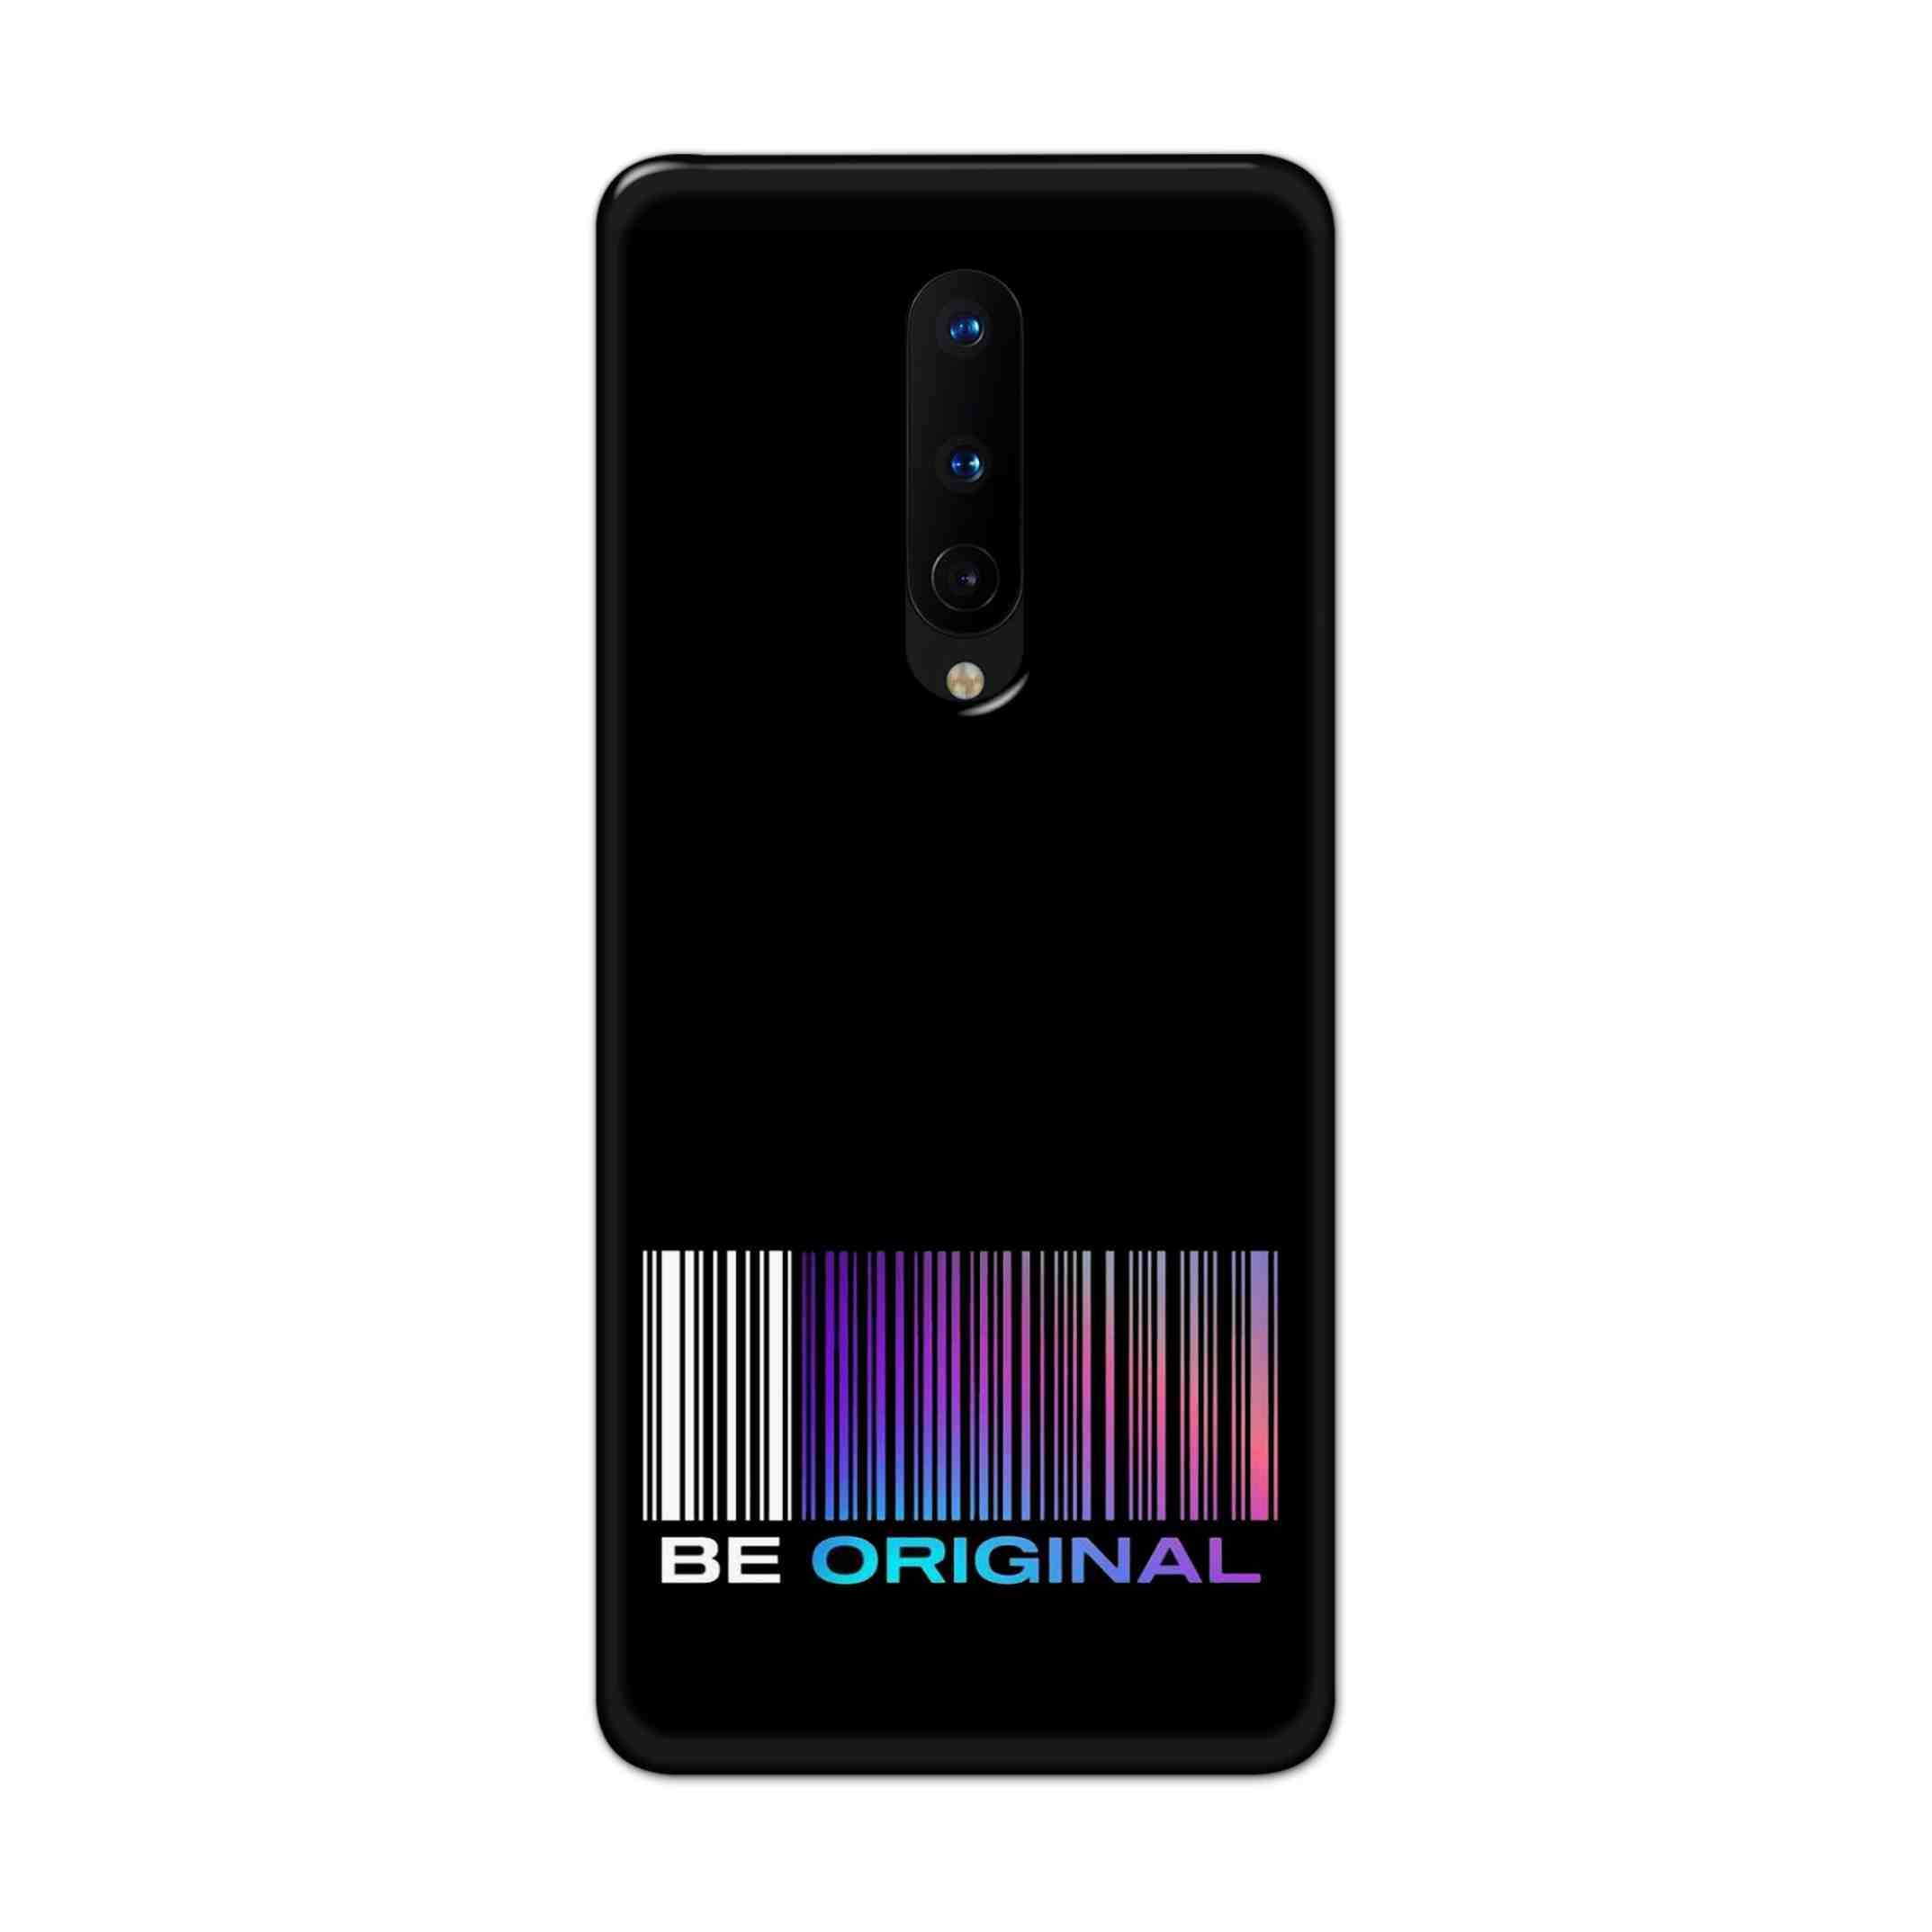 Buy Be Original Hard Back Mobile Phone Case Cover For OnePlus 8 Online